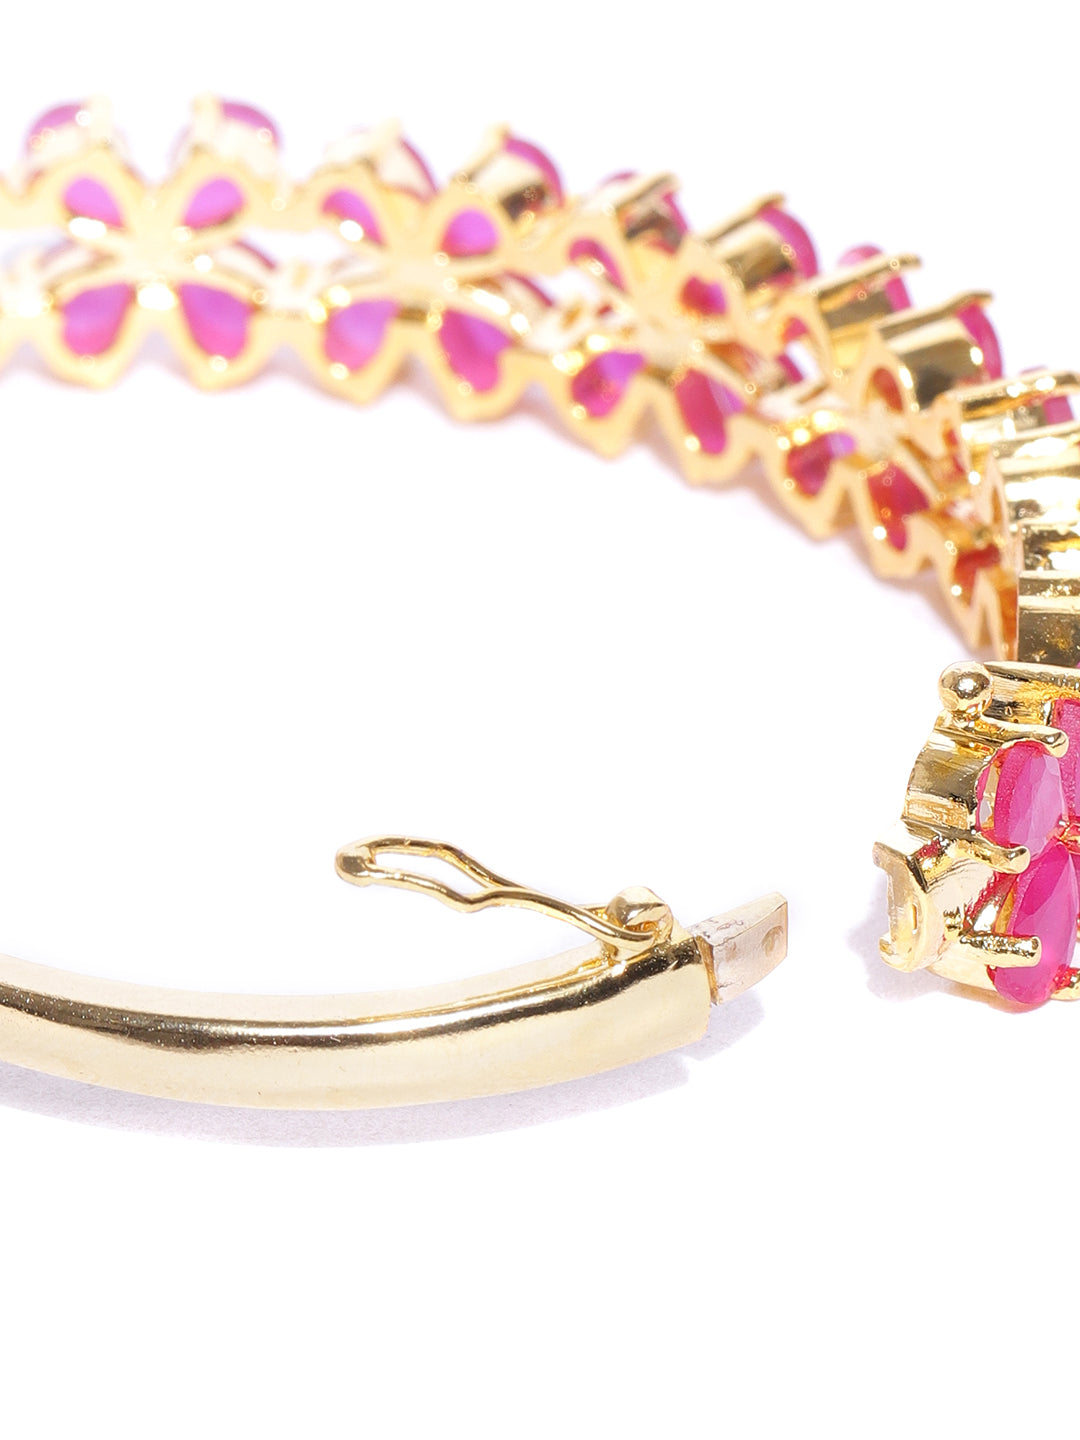 Ruby Stones Studded Gold-Plated Bracelet in Floral Pattern